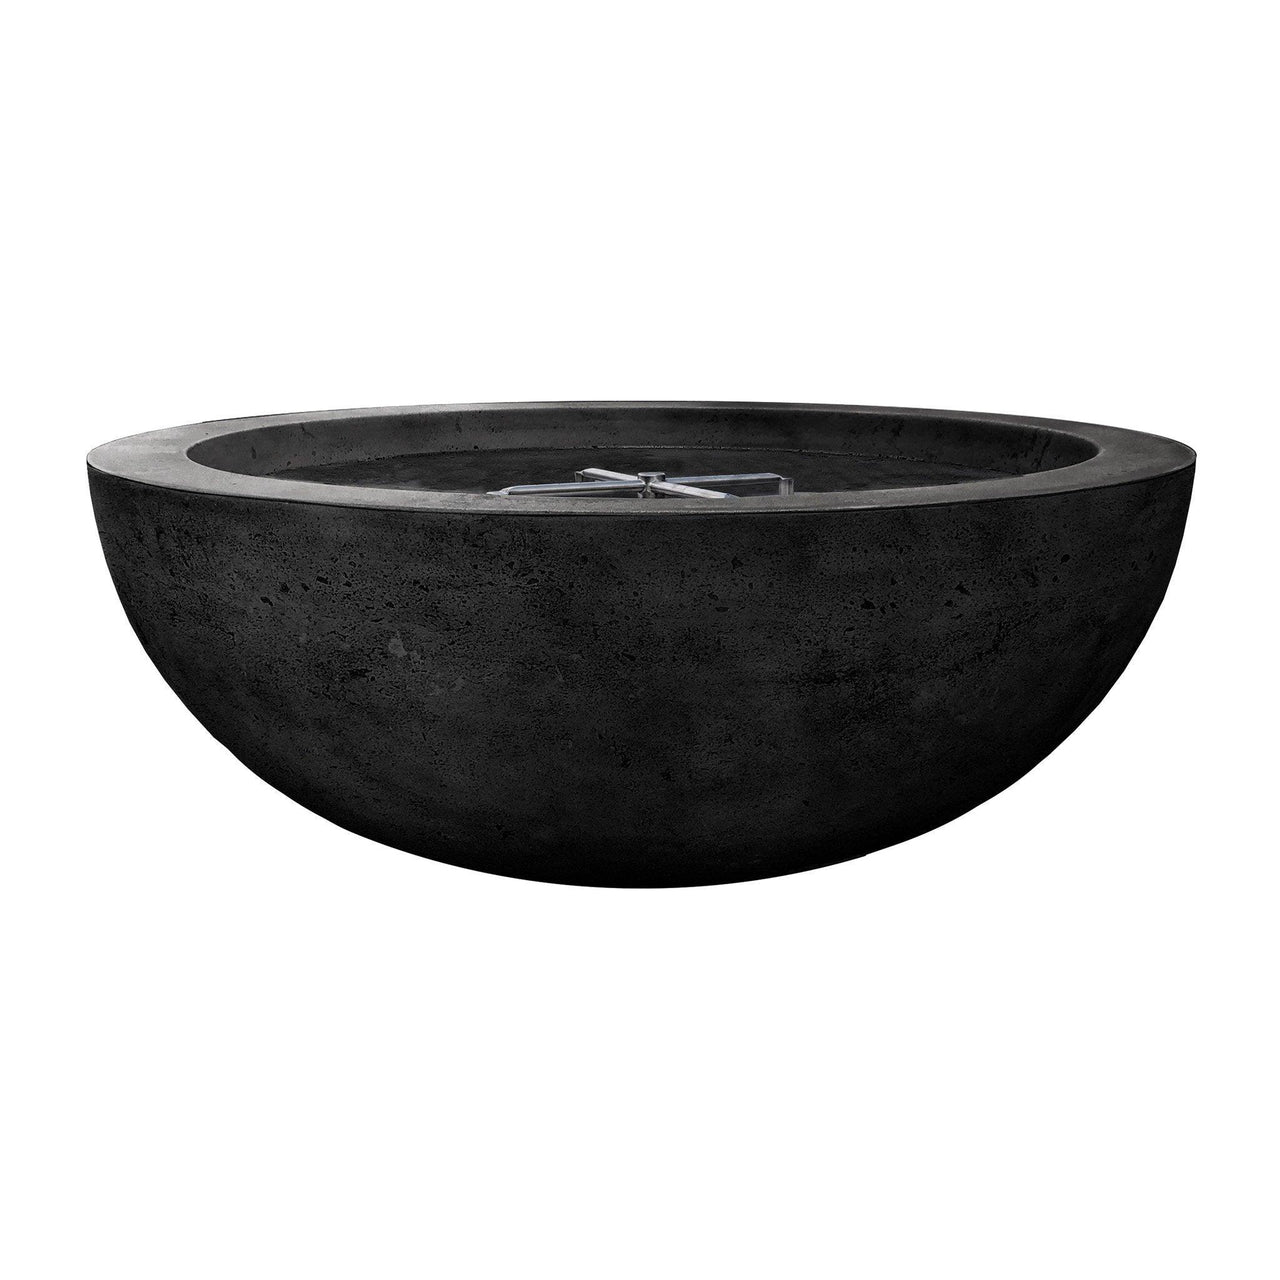 Prism Hardscapes - Moderno Series 4 Round Concrete Fire Bowl - Fire Pit Stock